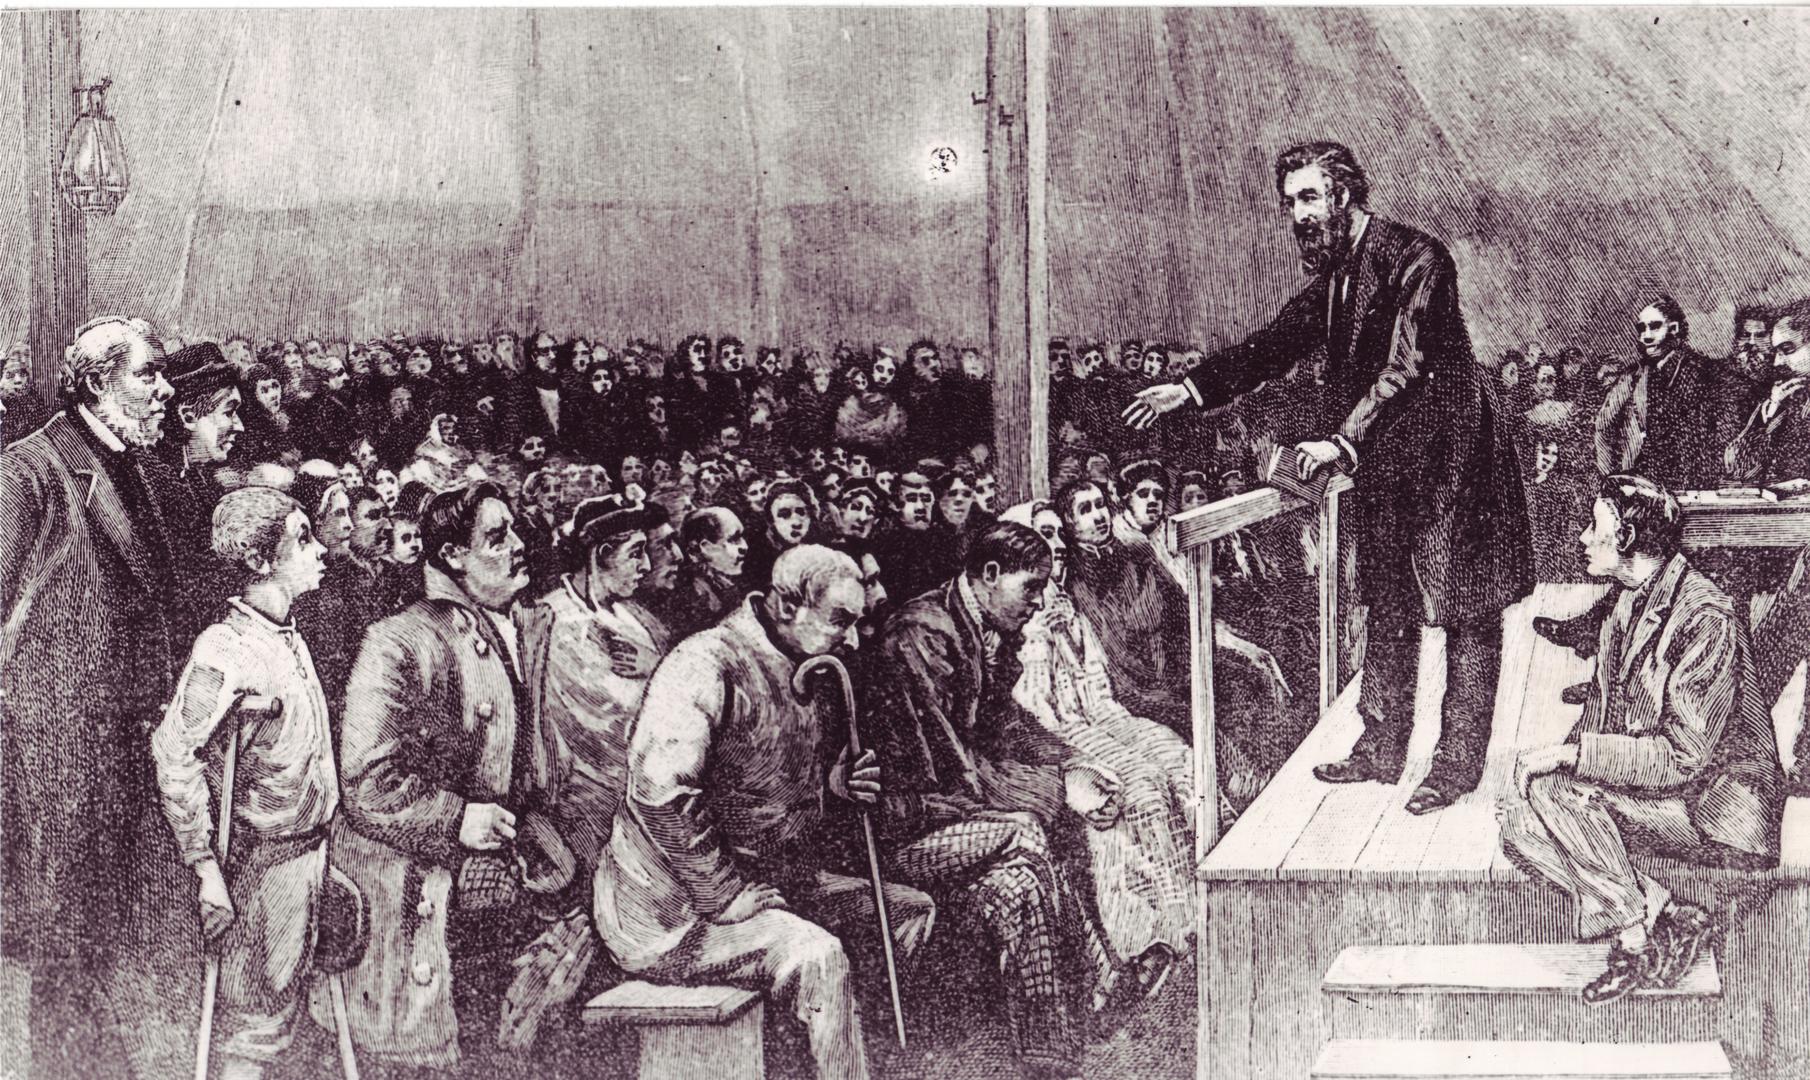 William Booth preaching at a tent meeting